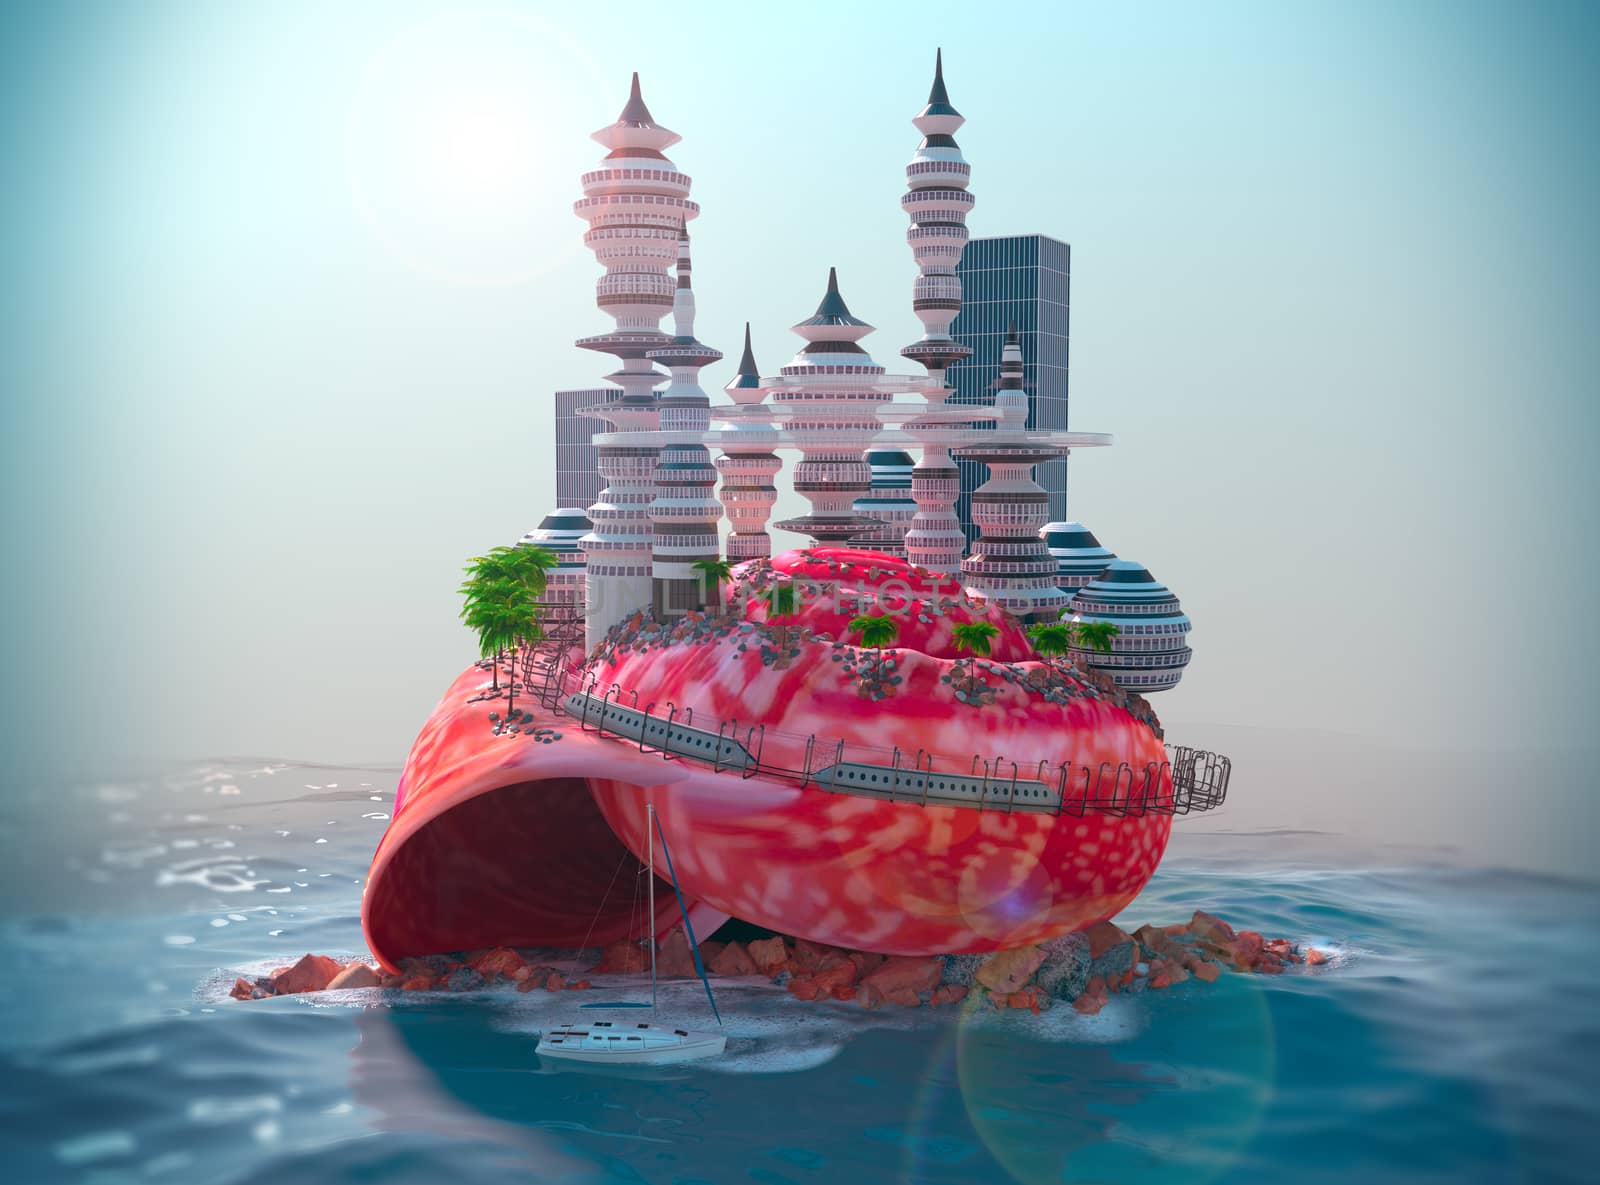 relaxing vacation concept background with seashell and ecologic futuristic city by denisgo